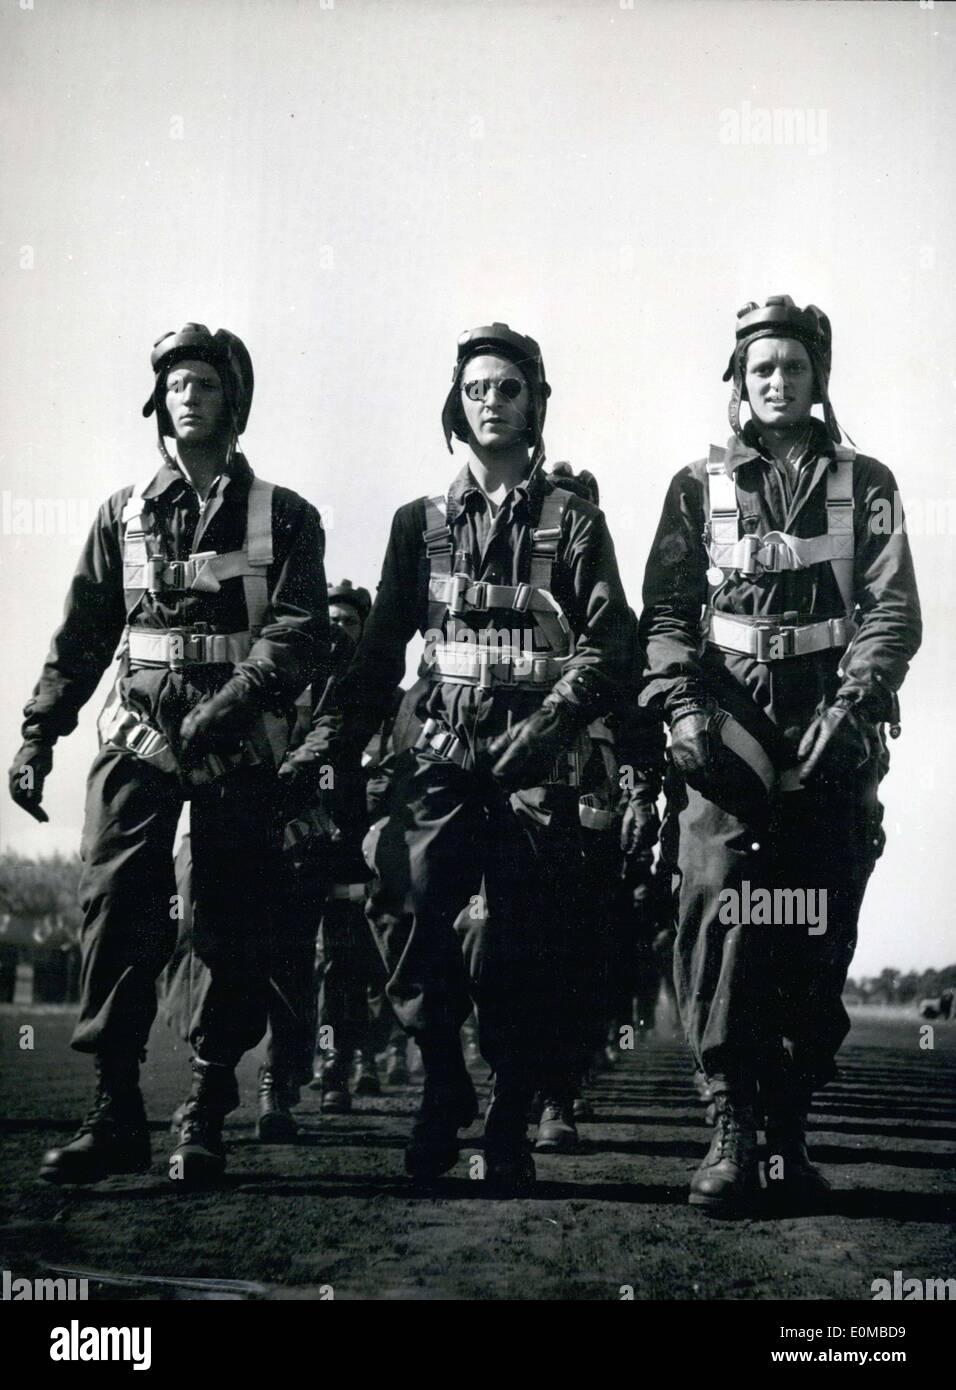 Jun. 06, 1954 - Pictured is a formation of East German paratroopers from the Soviet zone as they walk on the trotting course in Stock Photo